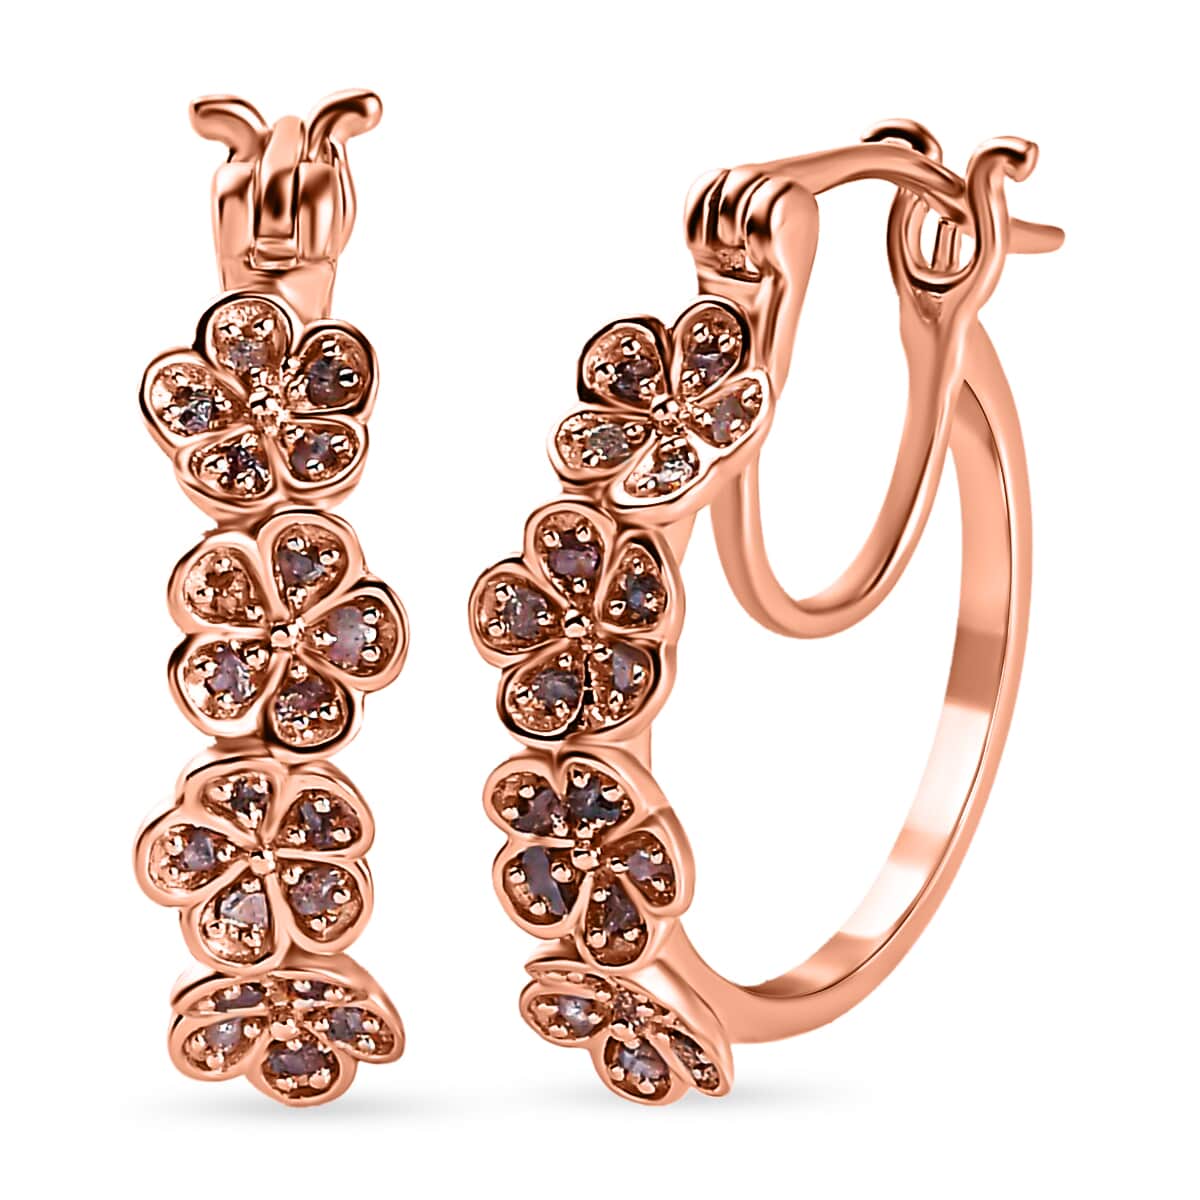 Uncut Natural Pink Diamond Floral Hoop Earrings, Vermeil Rose Gold Over Sterling Silver Earrings, Pink Diamond Jewelry For Her, Diamond Gifts 0.33 ctw image number 0